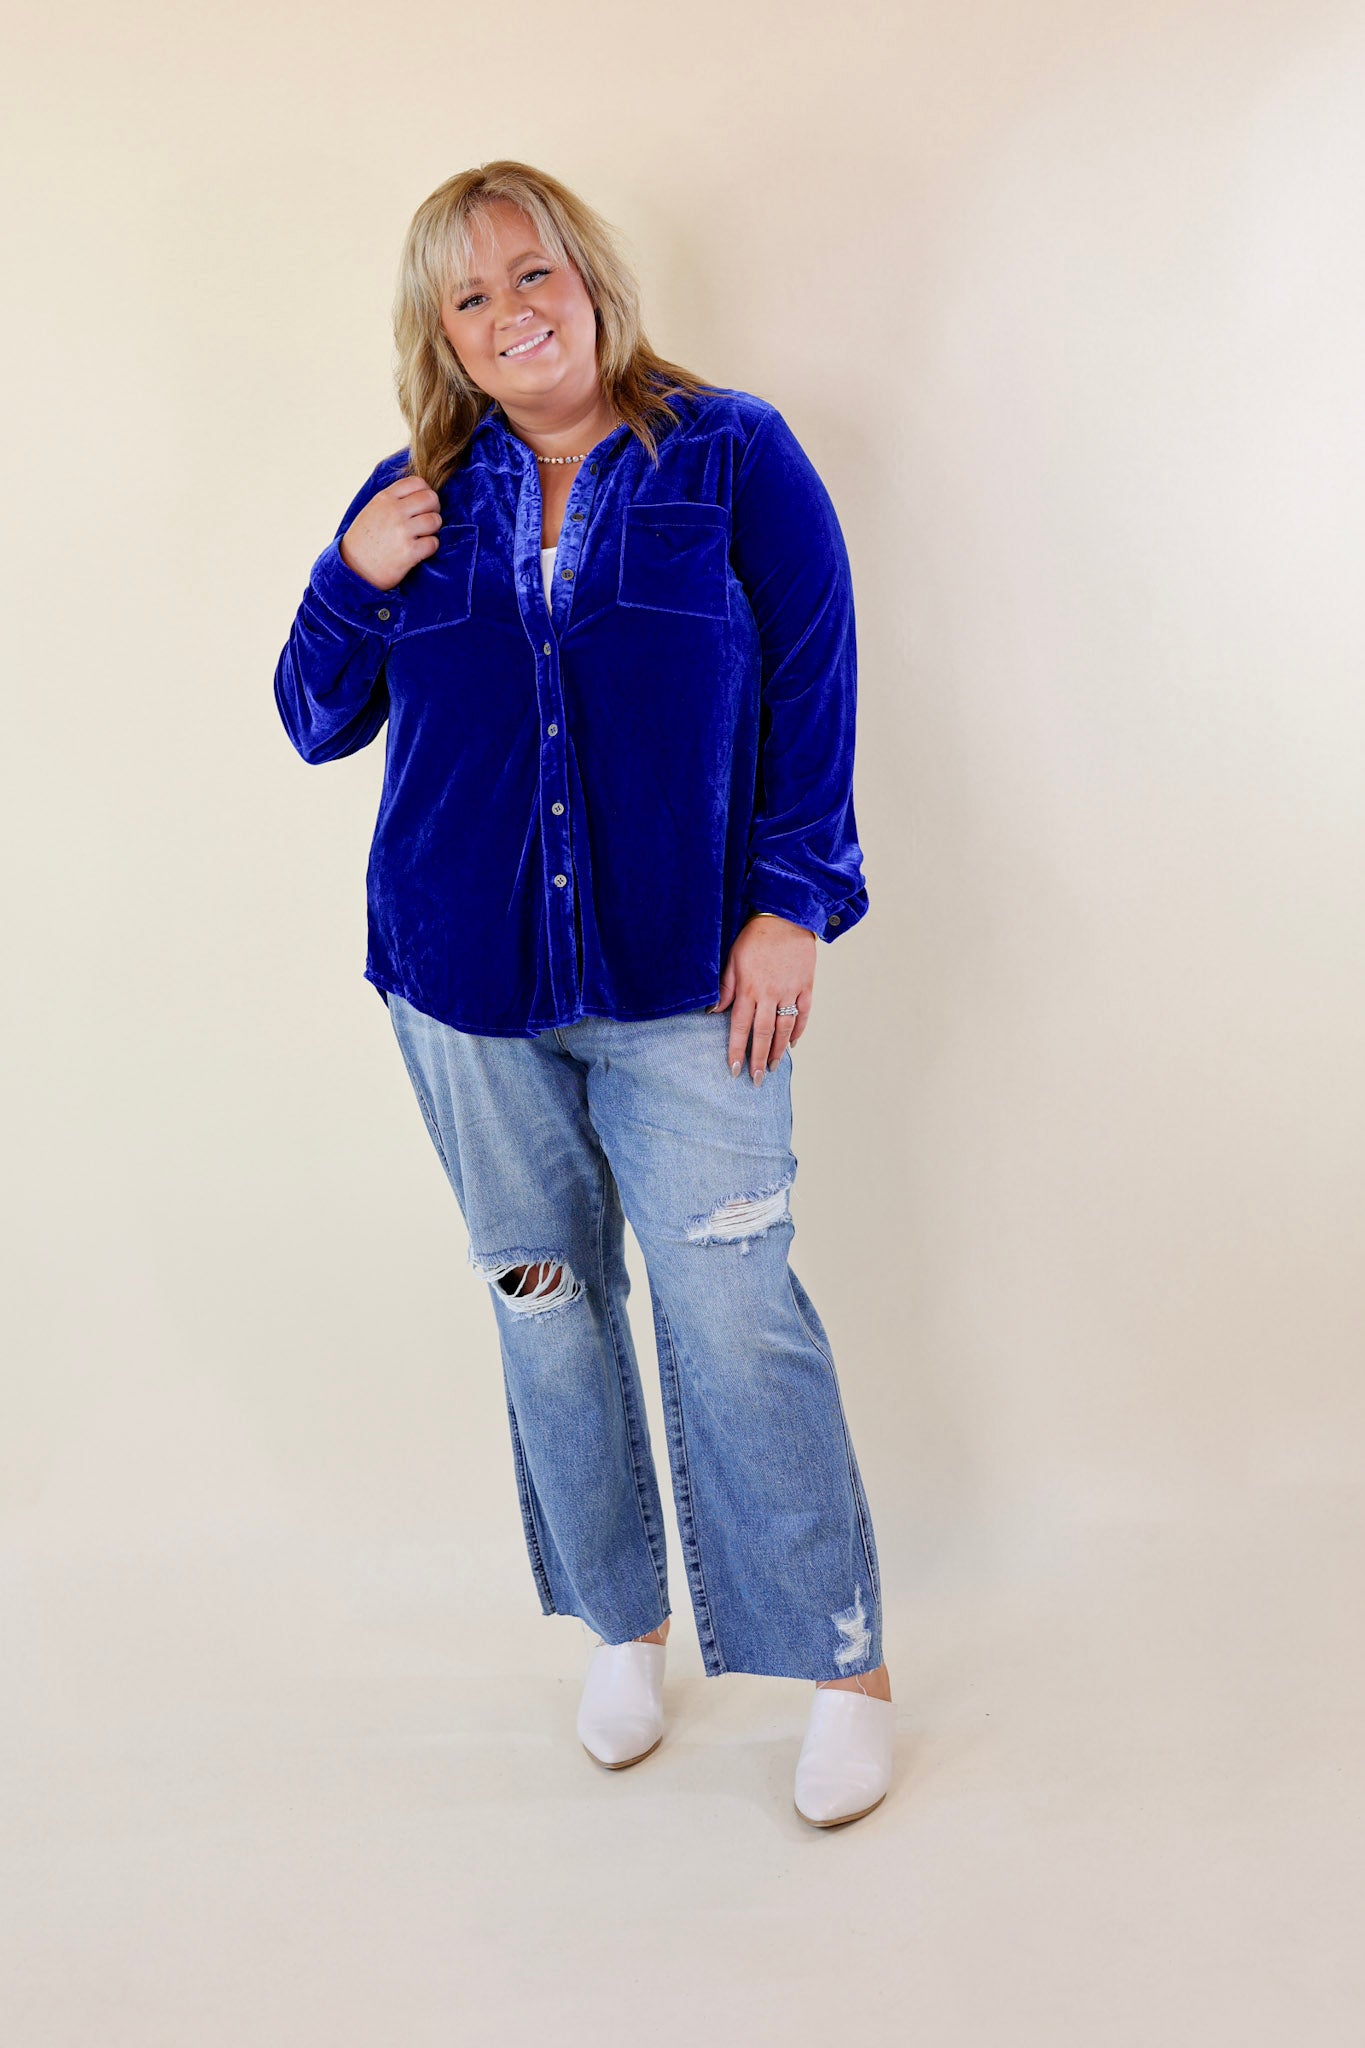 Candy Apple Evening Button Up Velvet Long Sleeve Blouse in Royal Blue - Giddy Up Glamour Boutique